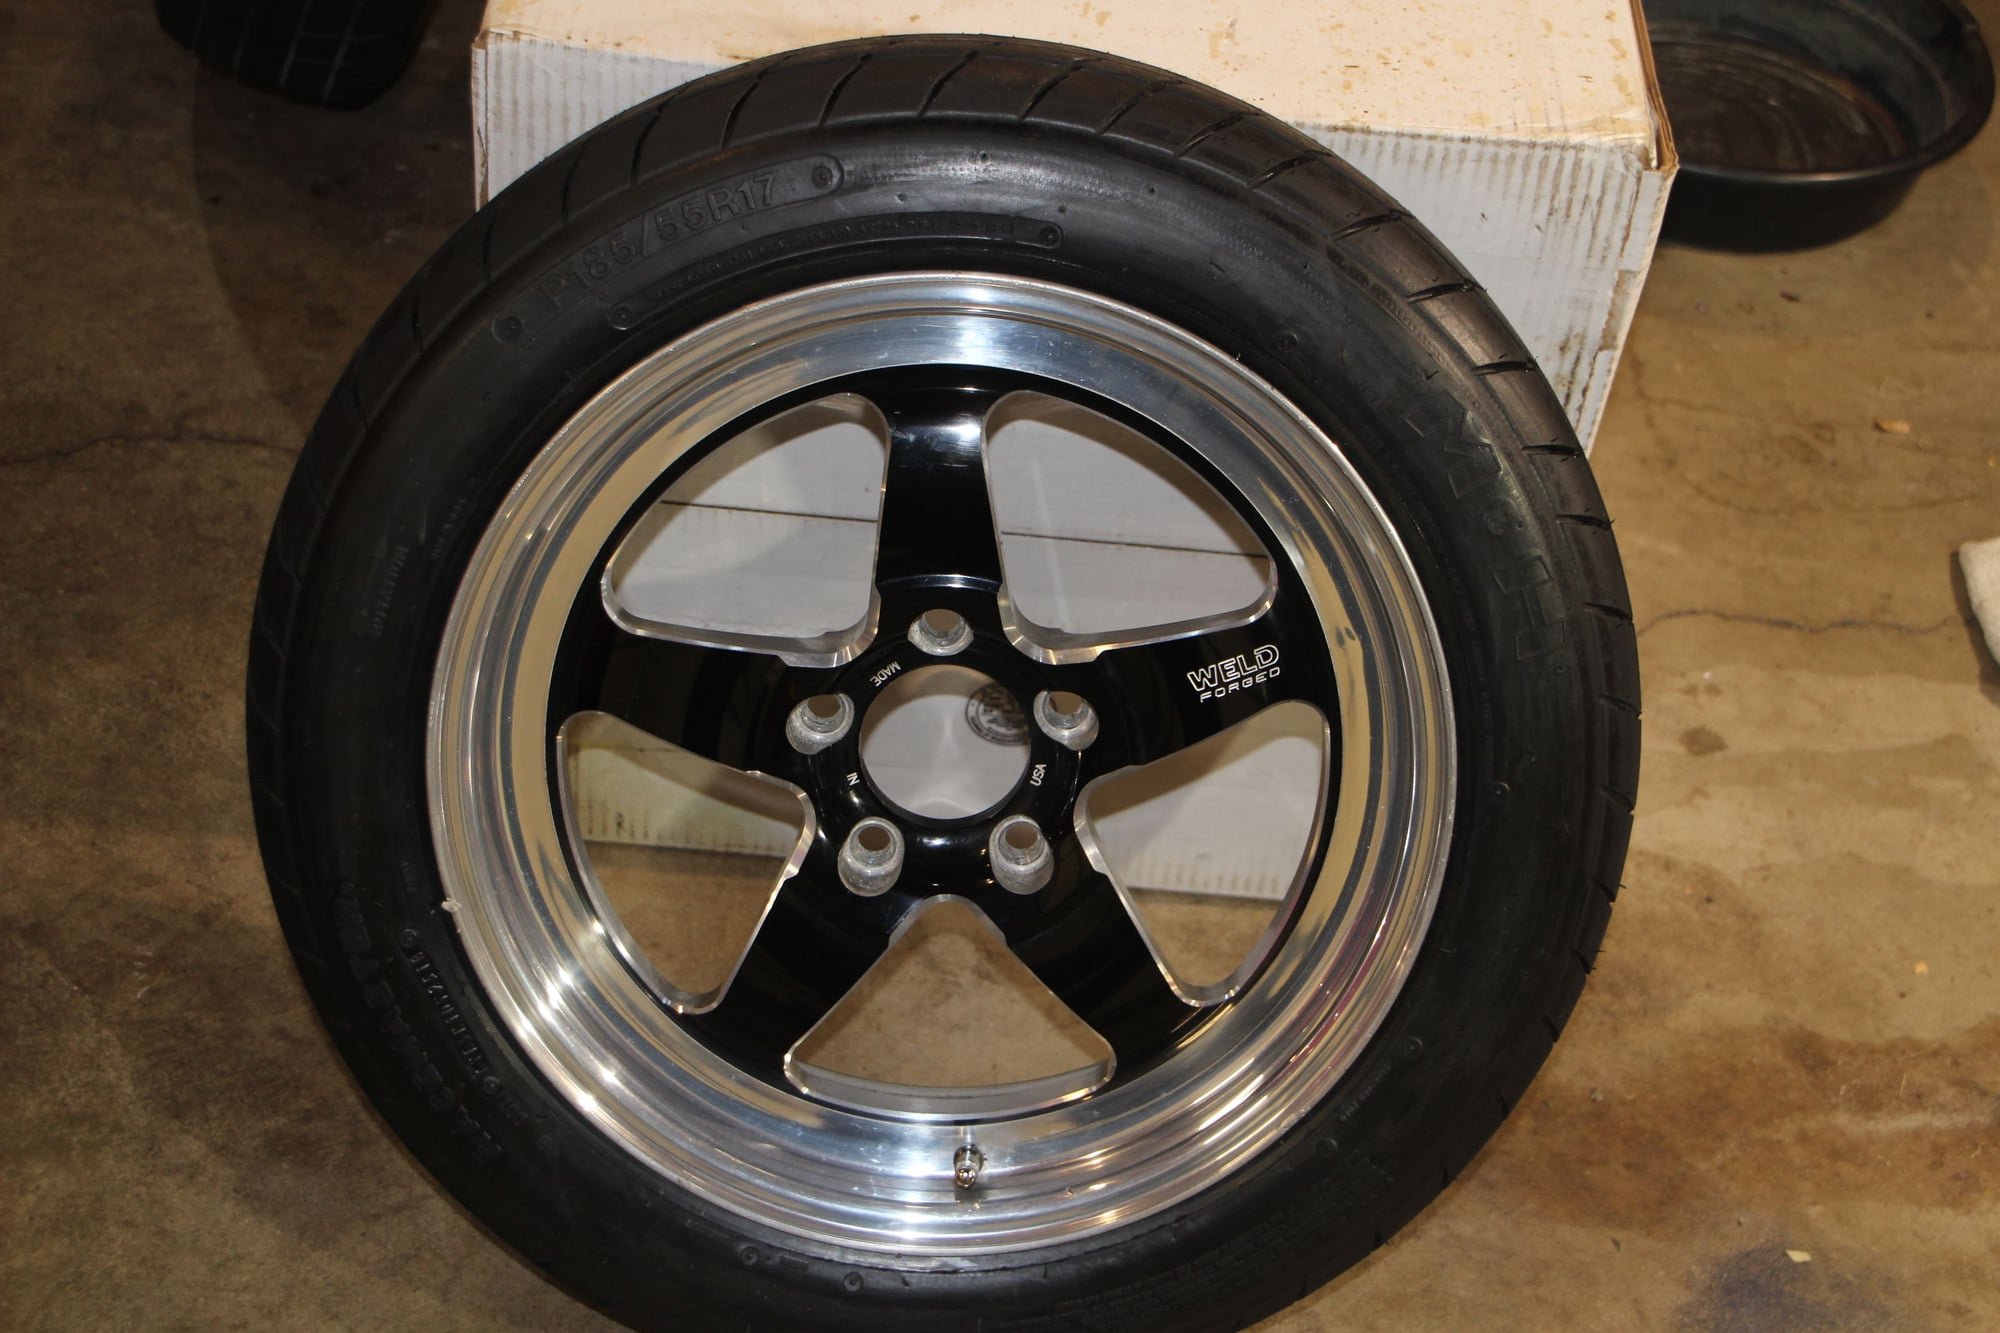  - 17" x 5.5" WELD RTS S71 Front Runners and M&H Racemaster tires - Portage, IN 46368, United States